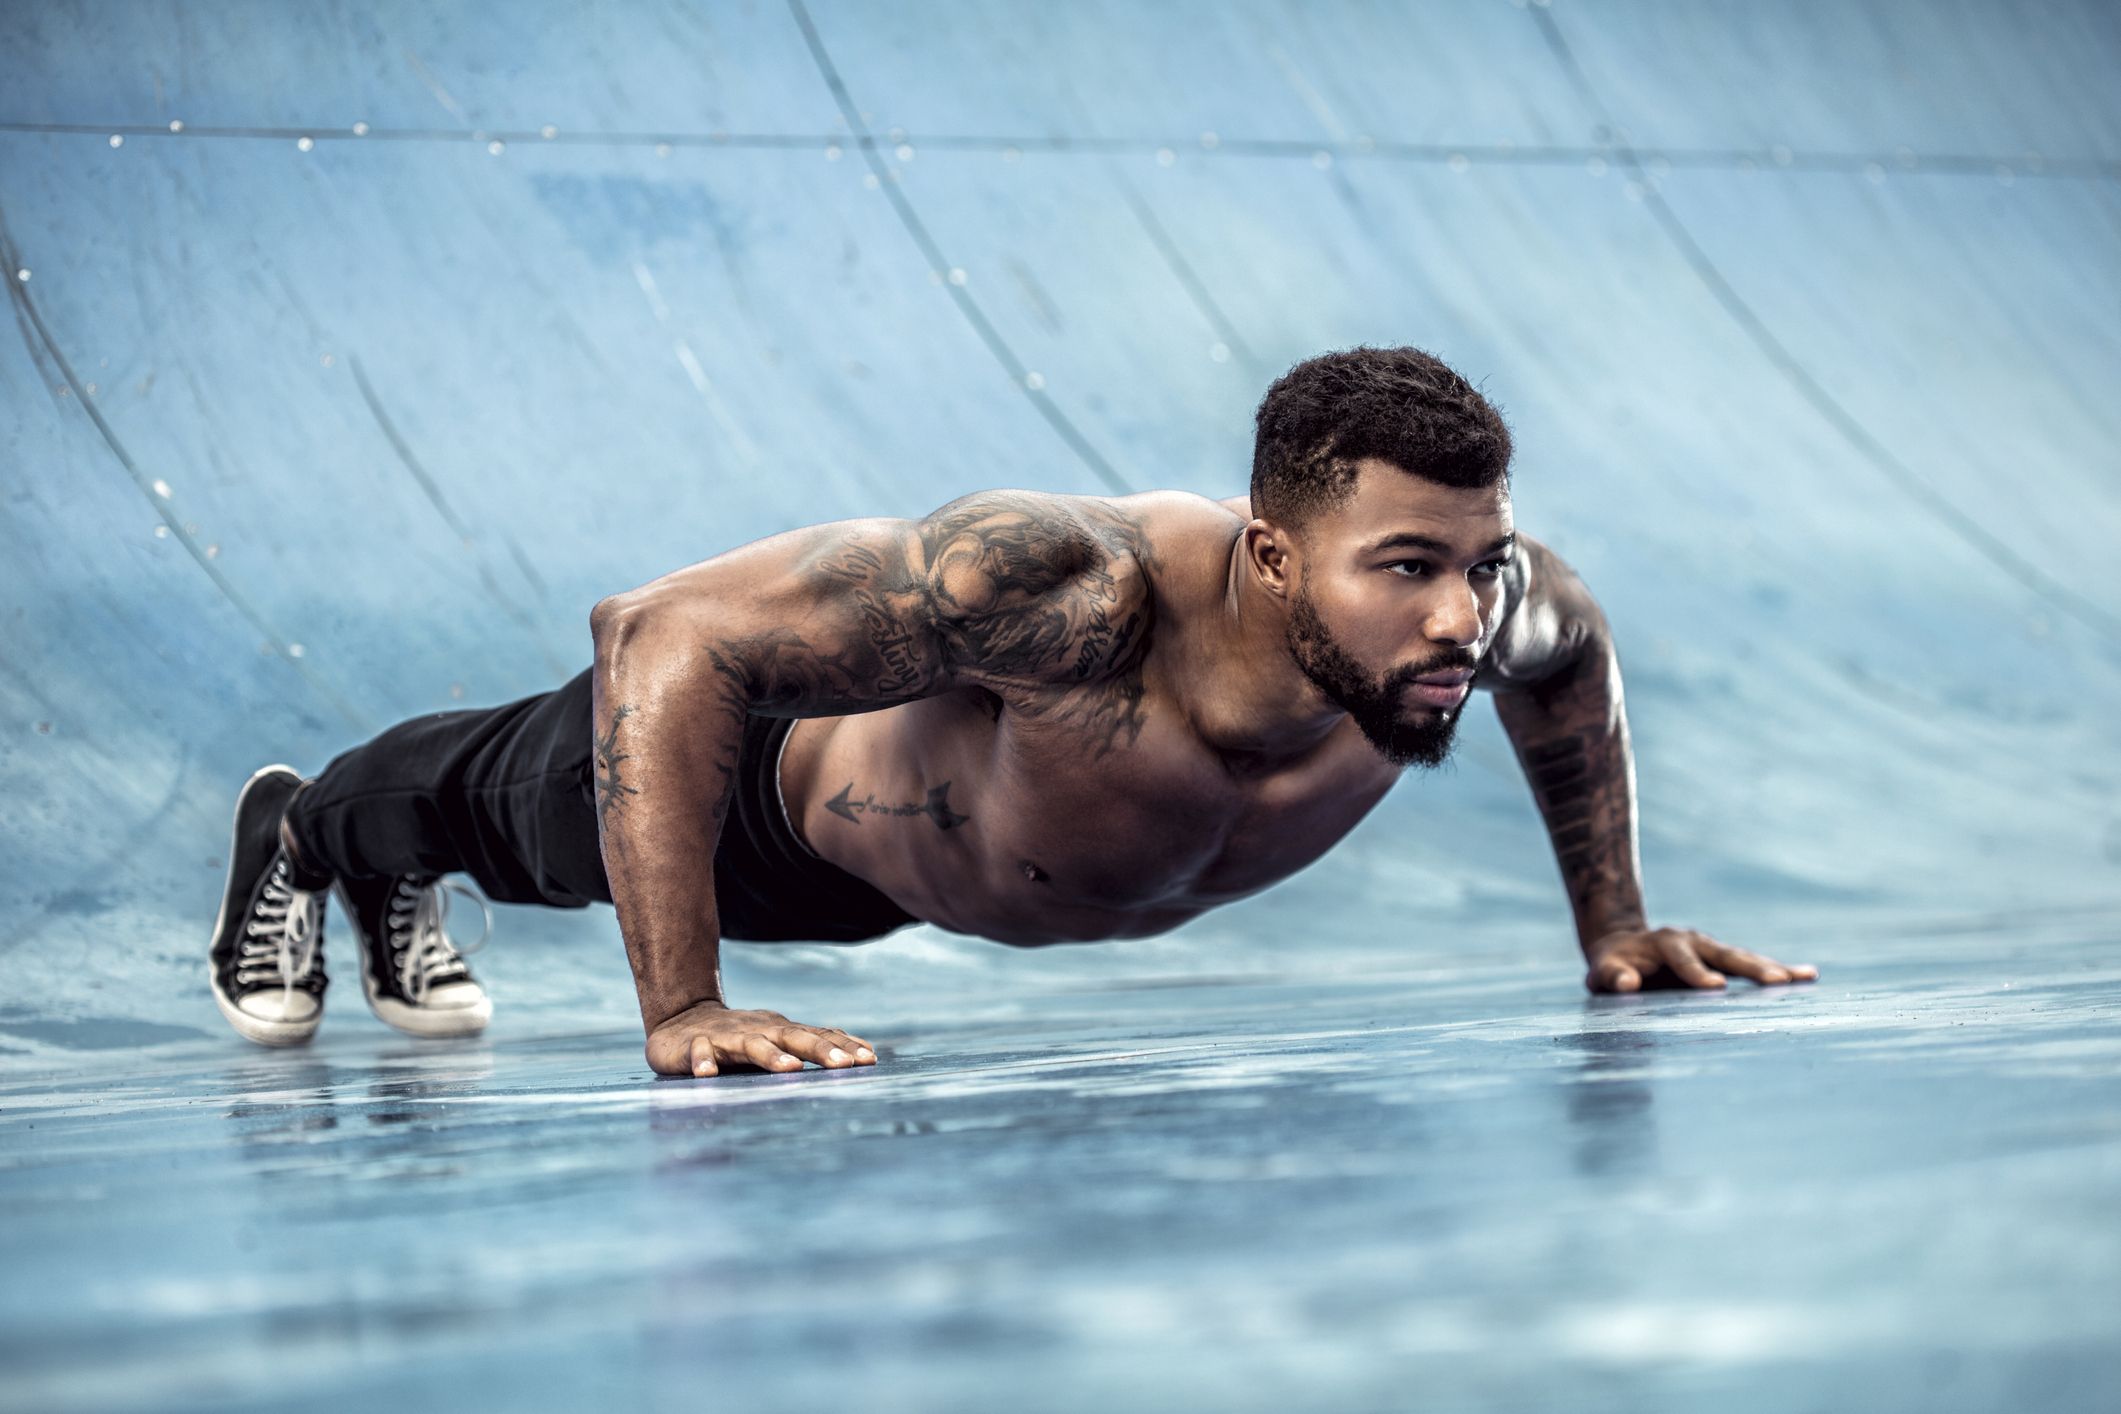 Decline push-up exercise instructions and video